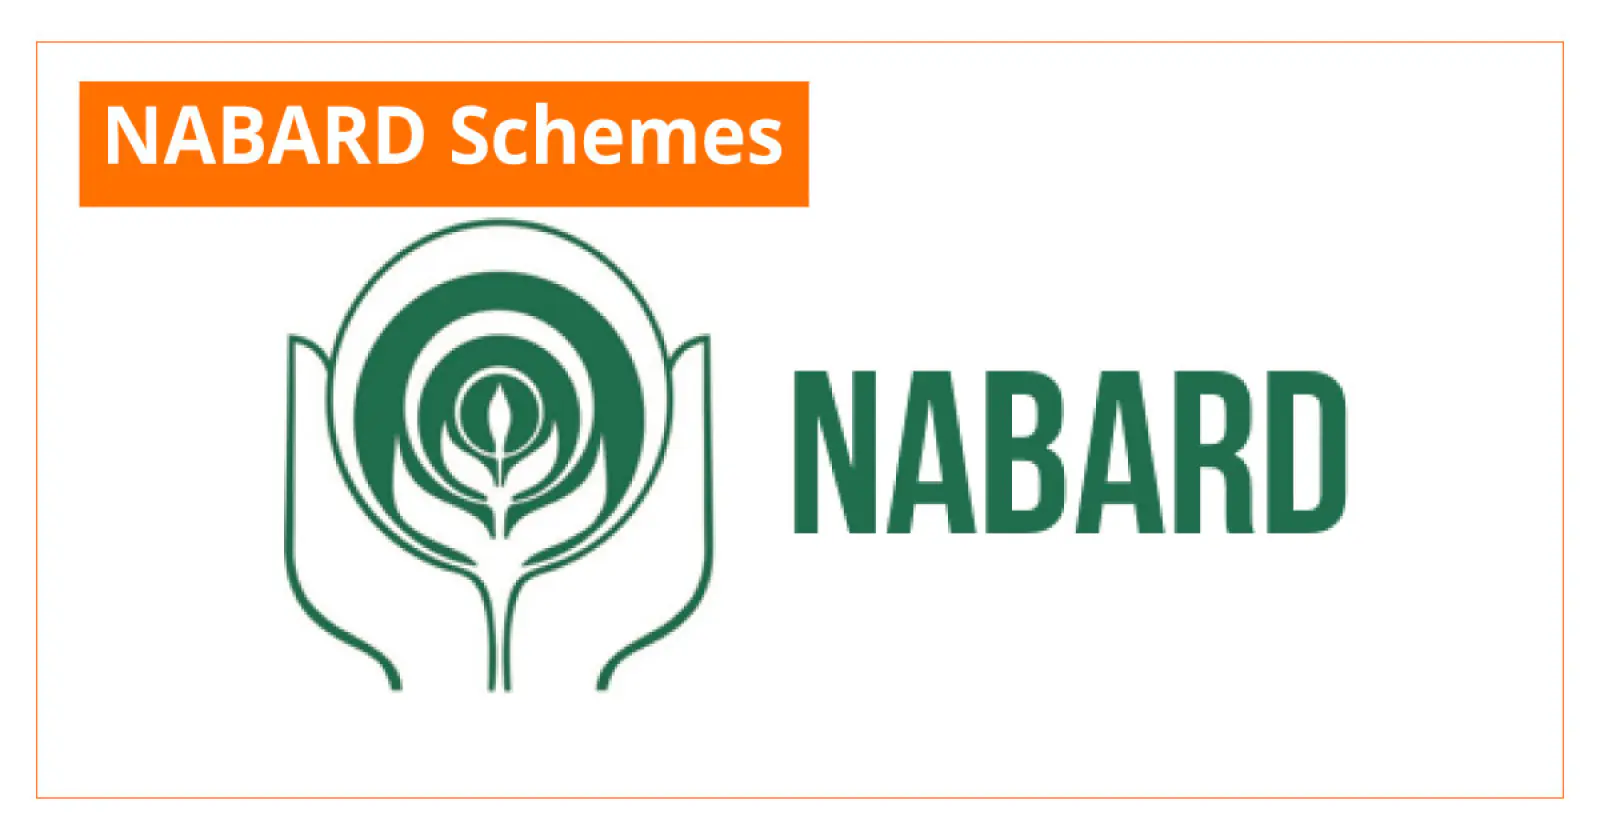 Does NABARD give direct loans under 'Dairy Loan Scheme'? Bank issued a statement clarifying the situation on the rumours